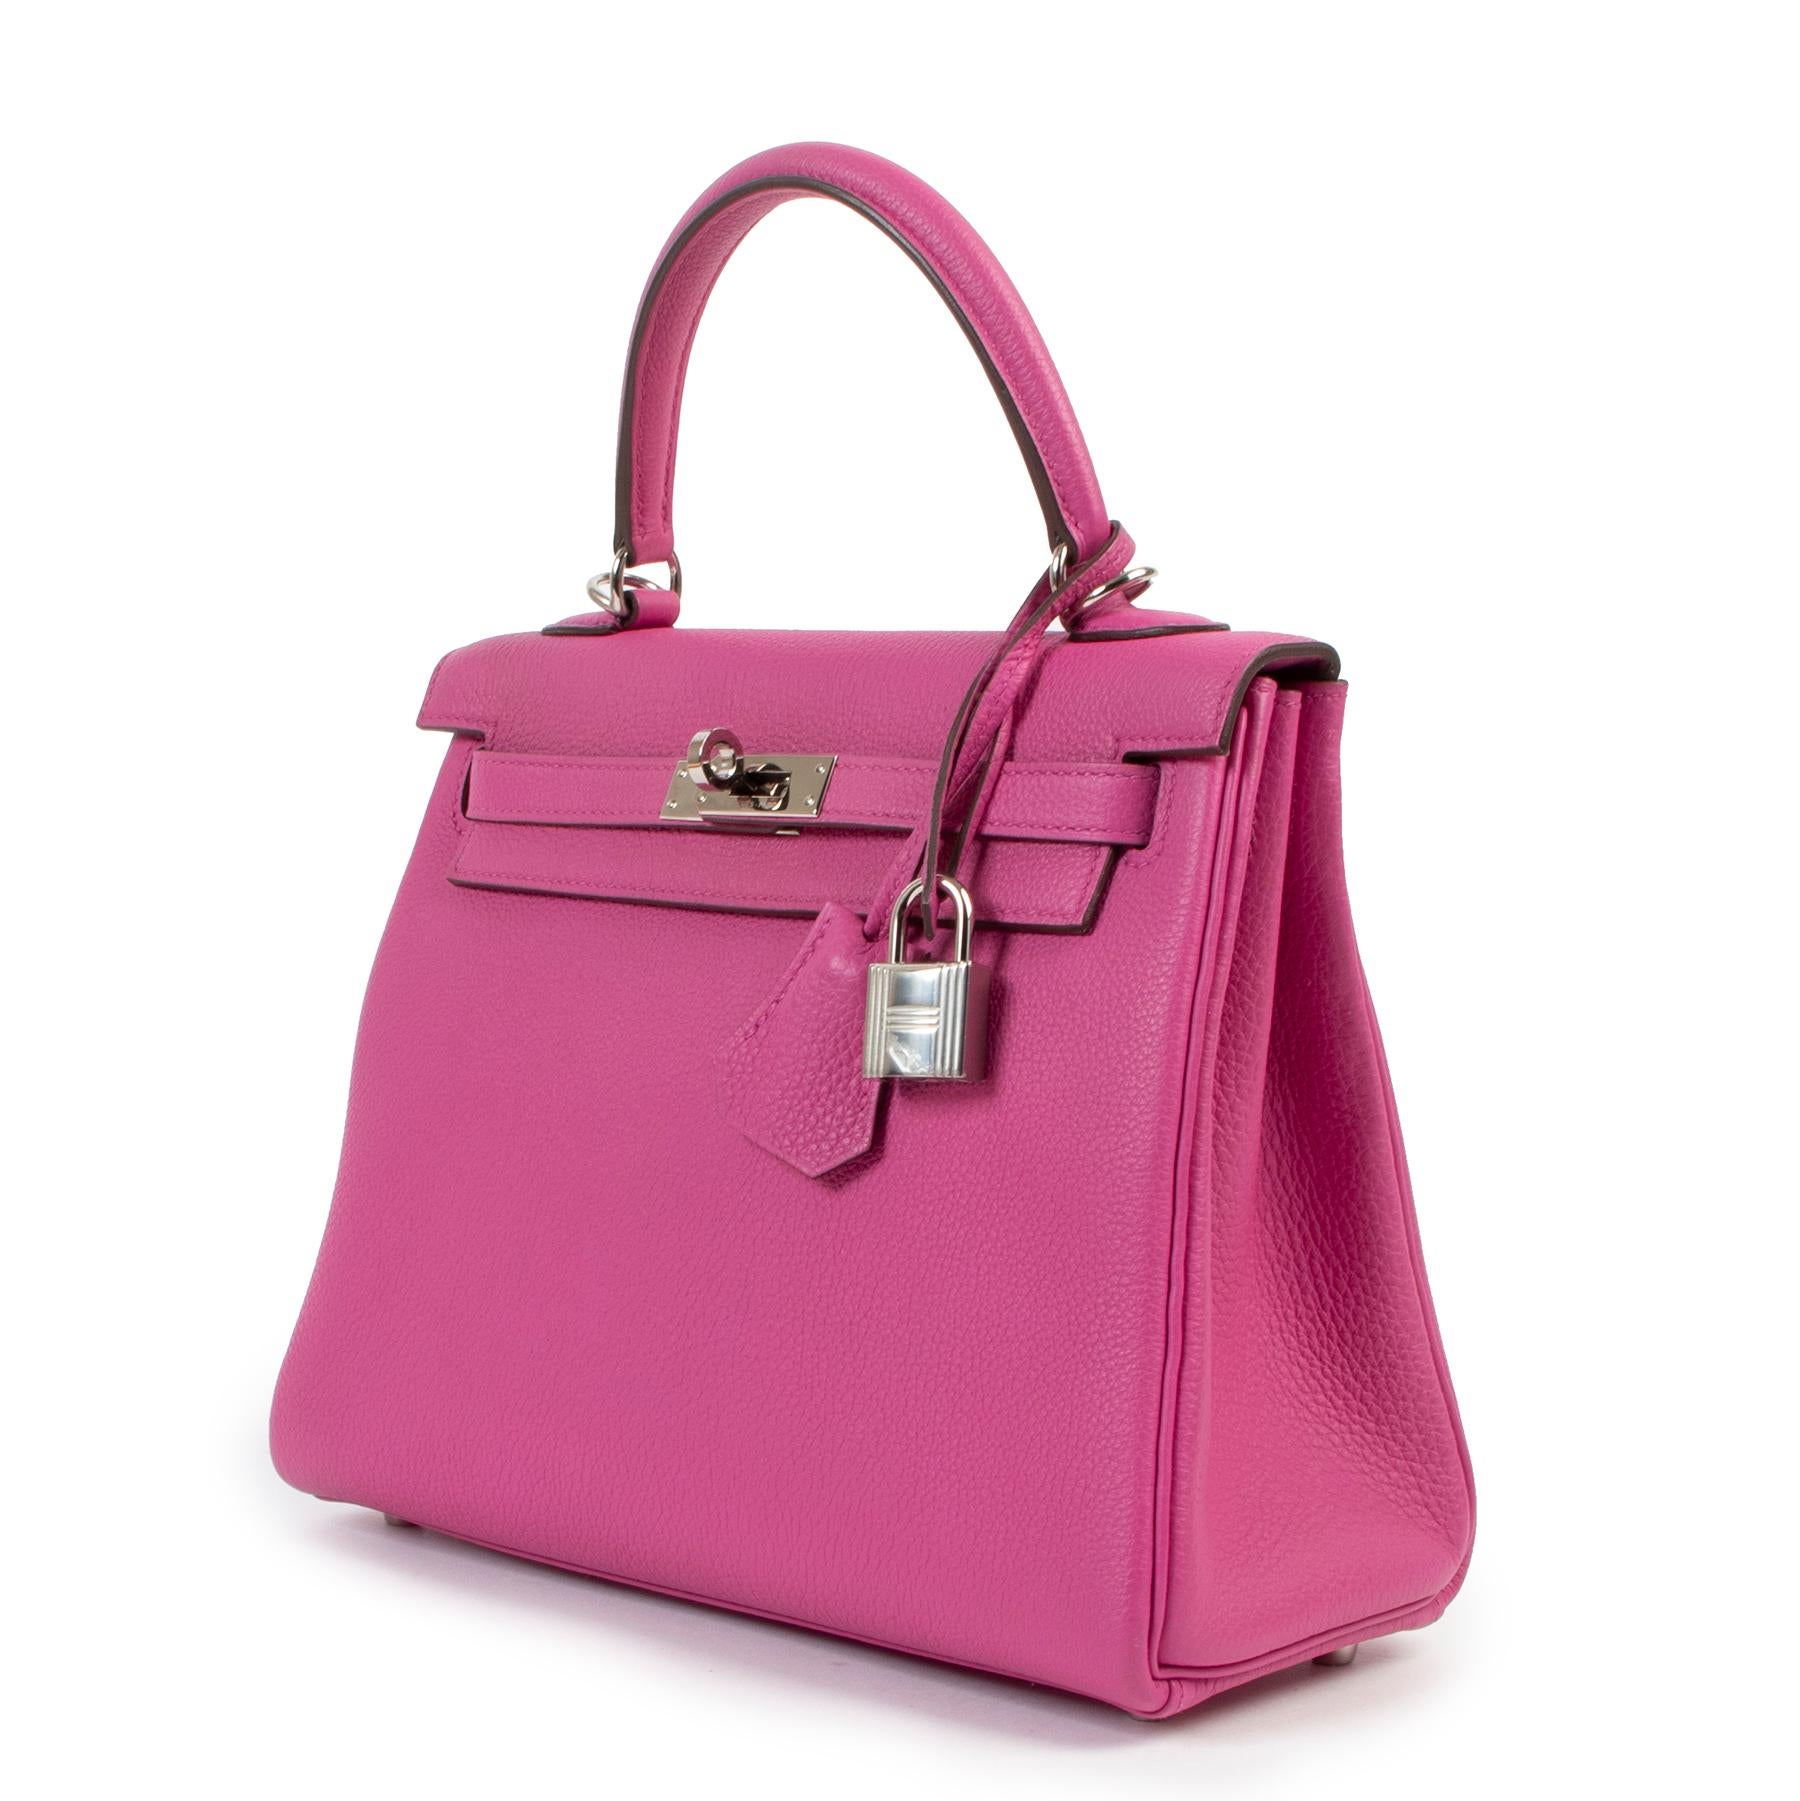 Hermès Magnolia Togo Kelly 25 Retourne

Make heads turn with this stunning Hermes Kelly 25. This stunning vibrant magnolia color will make heads turn. 
This ladylike Kelly is classic yet fun, a beautiful addition to any sophisticated wardrobe.